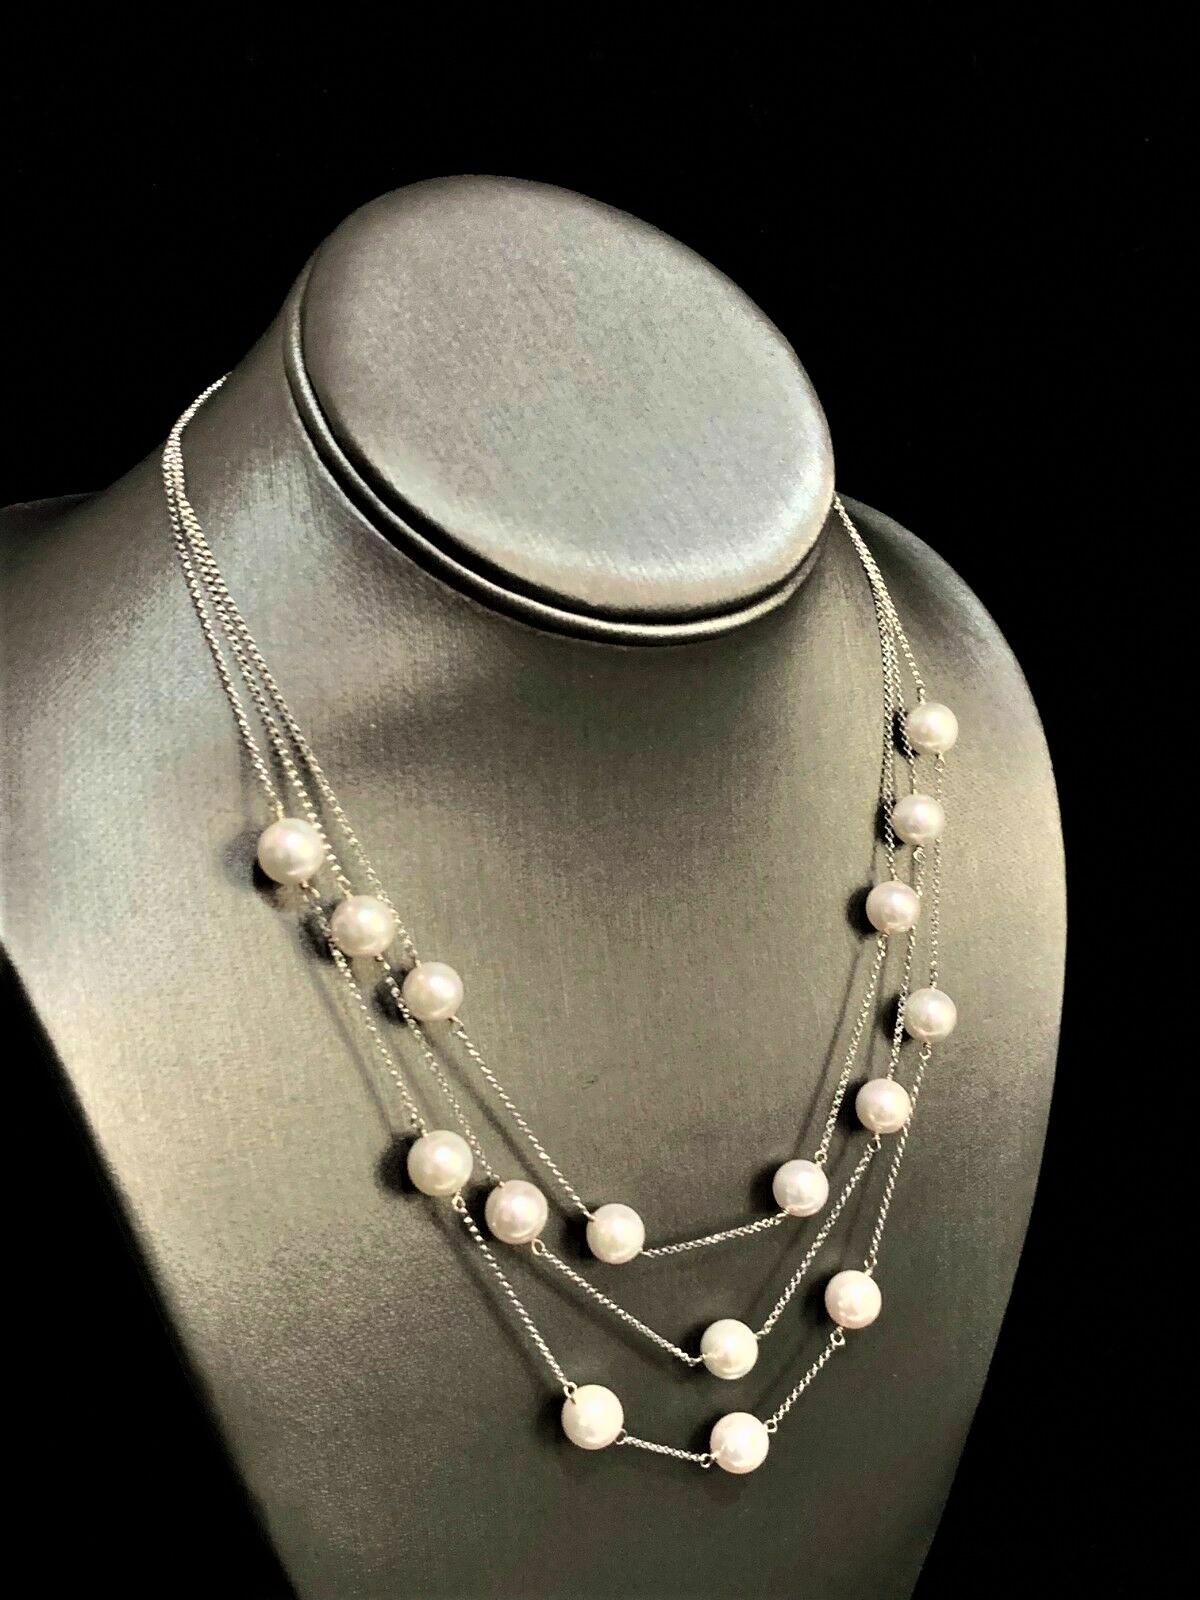 GAL Certified $3,595

Nothing says, “I Love you” more than Diamonds and Pearls!

Beautiful Necklace. Suitable For Any Occasion!!

This item has been Certified, Inspected and Appraised

by

Gemological Appraisal Laboratory
Gemological Appraisal